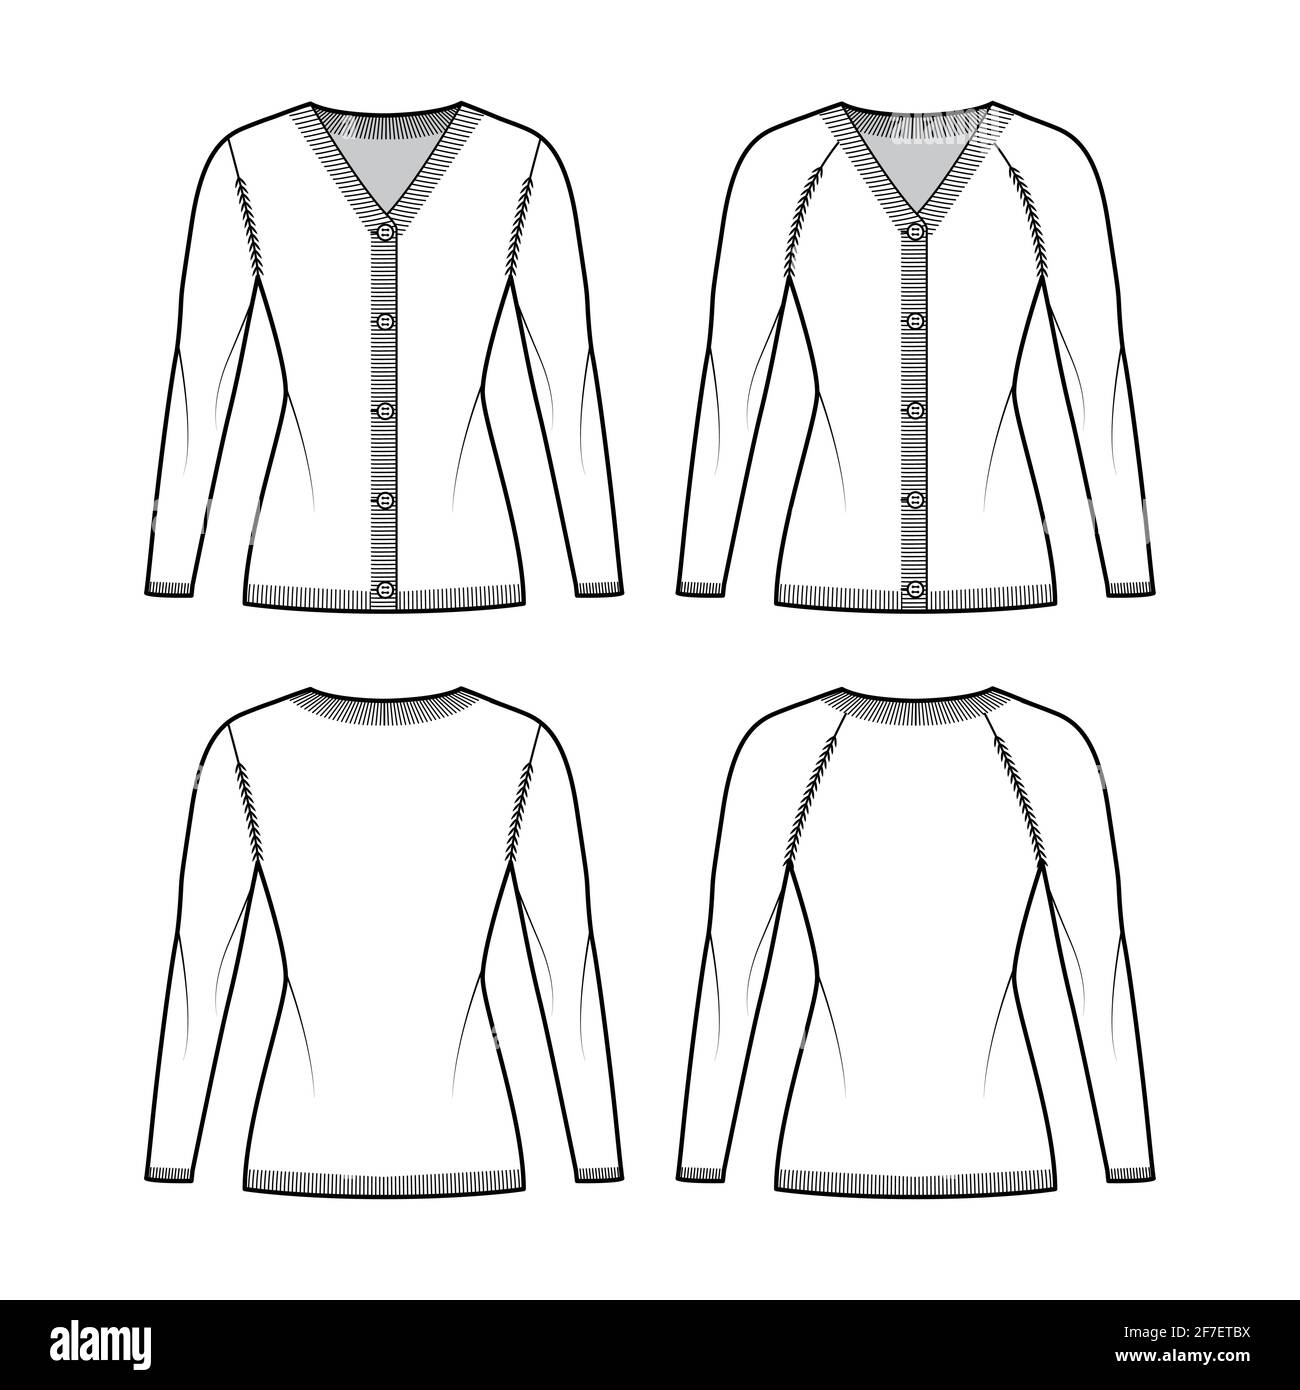 Cardigans Stock Vector Images - Alamy